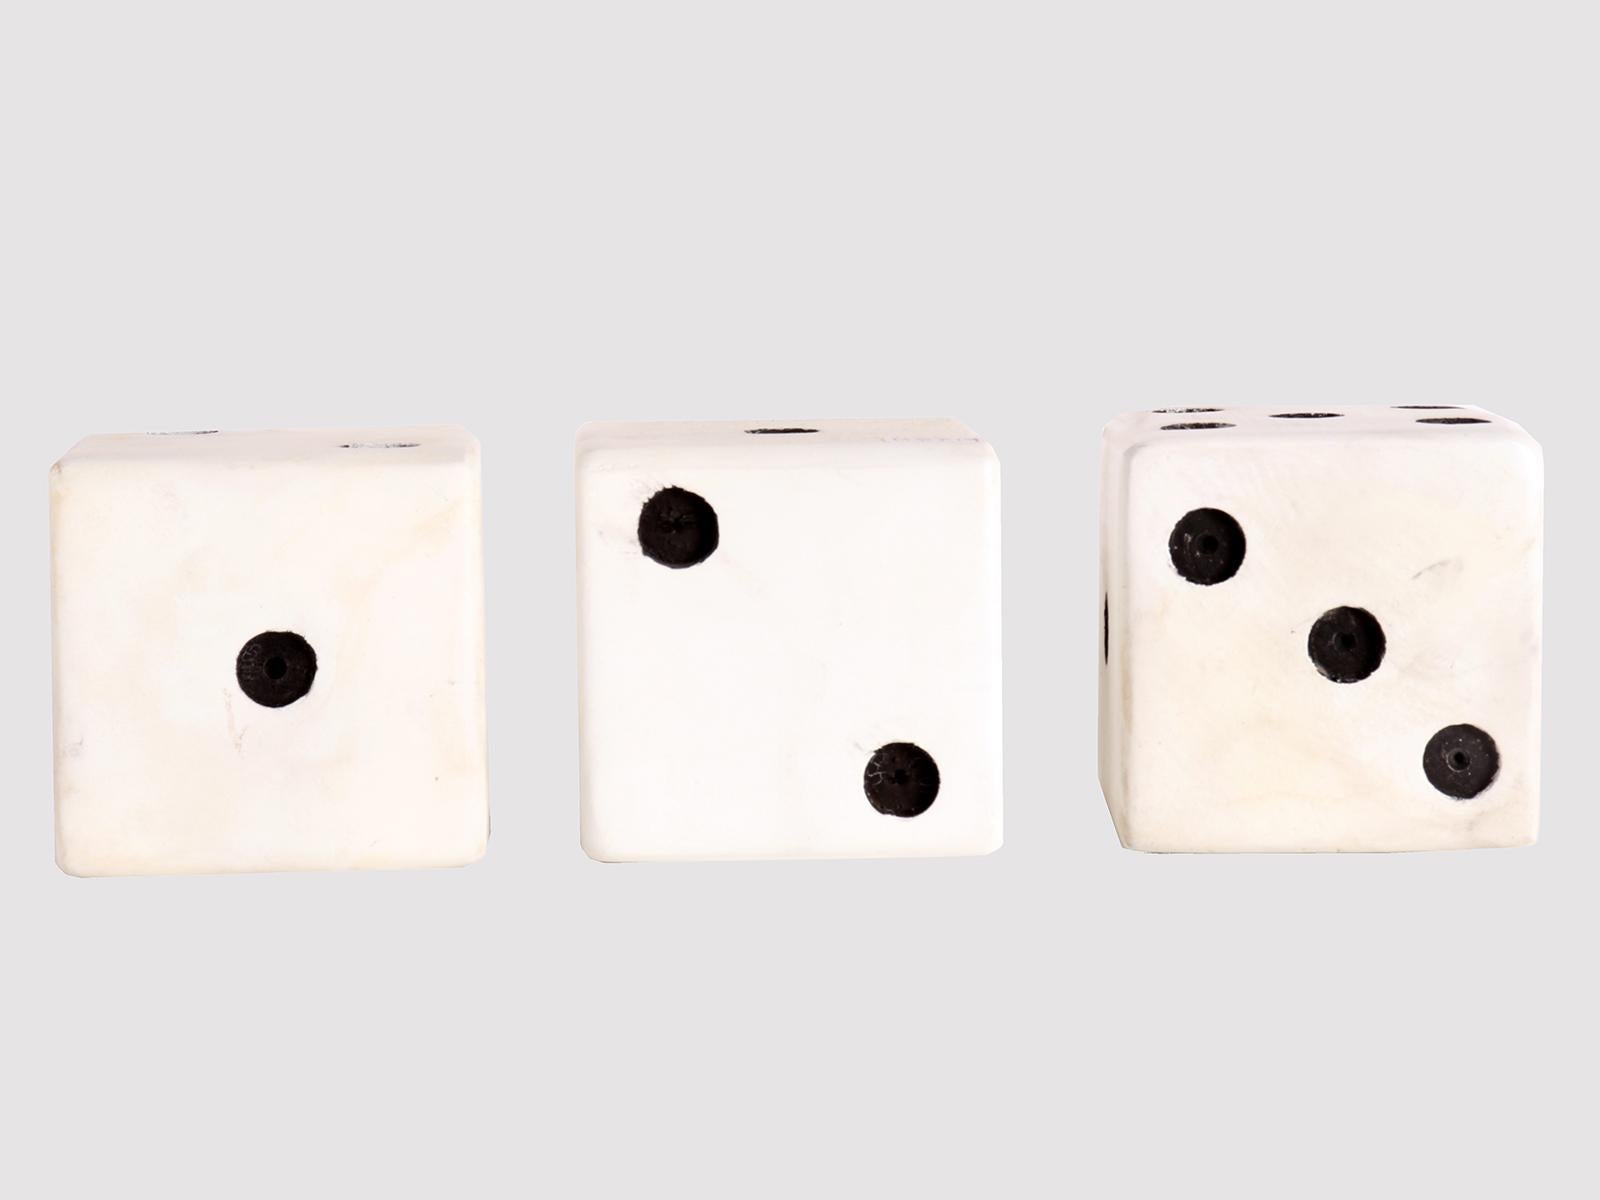 Three large dice, made of white painted wood. On the six sides of the cube, circles from 1 to 6 are engraved and painted in black. USA, circa 1940.